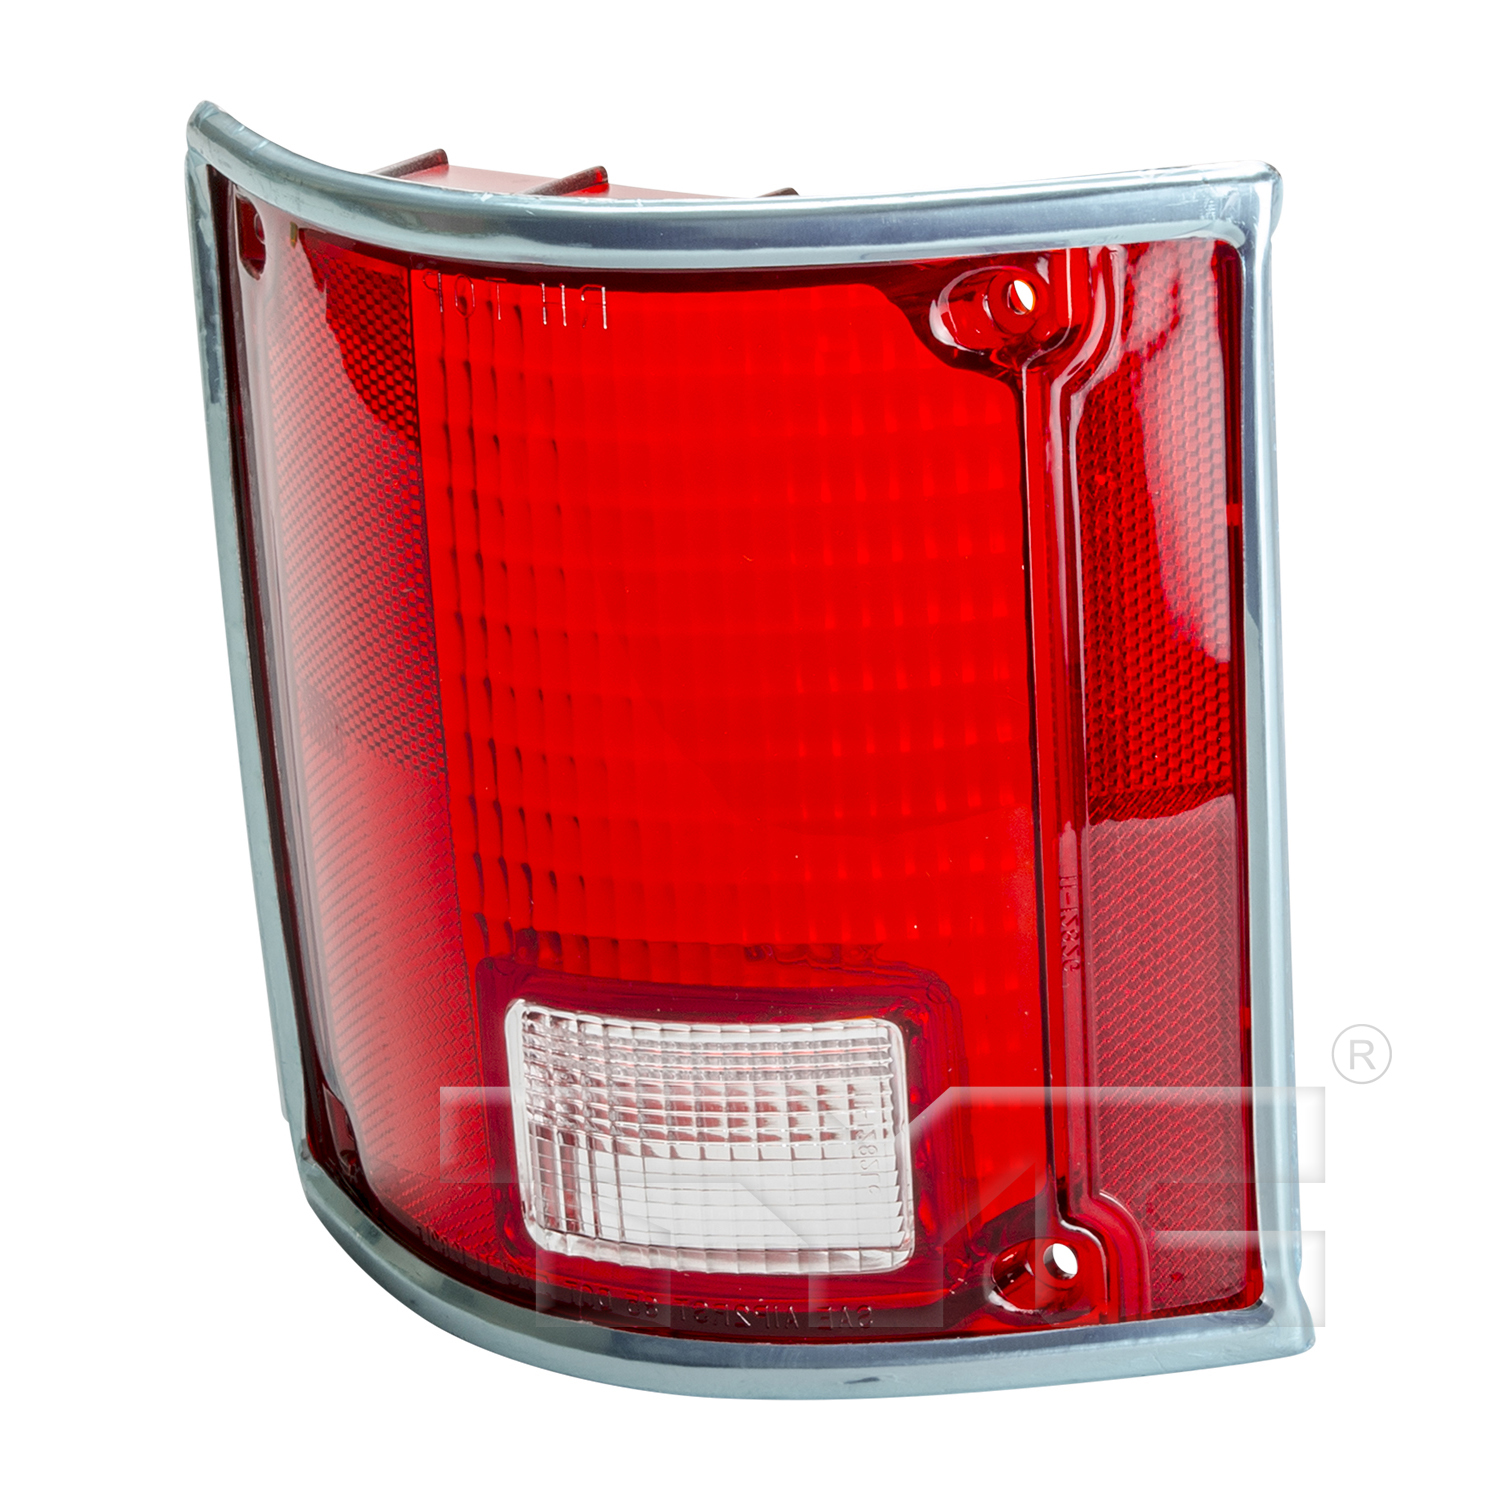 Aftermarket TAILLIGHTS for CHEVROLET - C20, C20,75-86,LT Taillamp lens